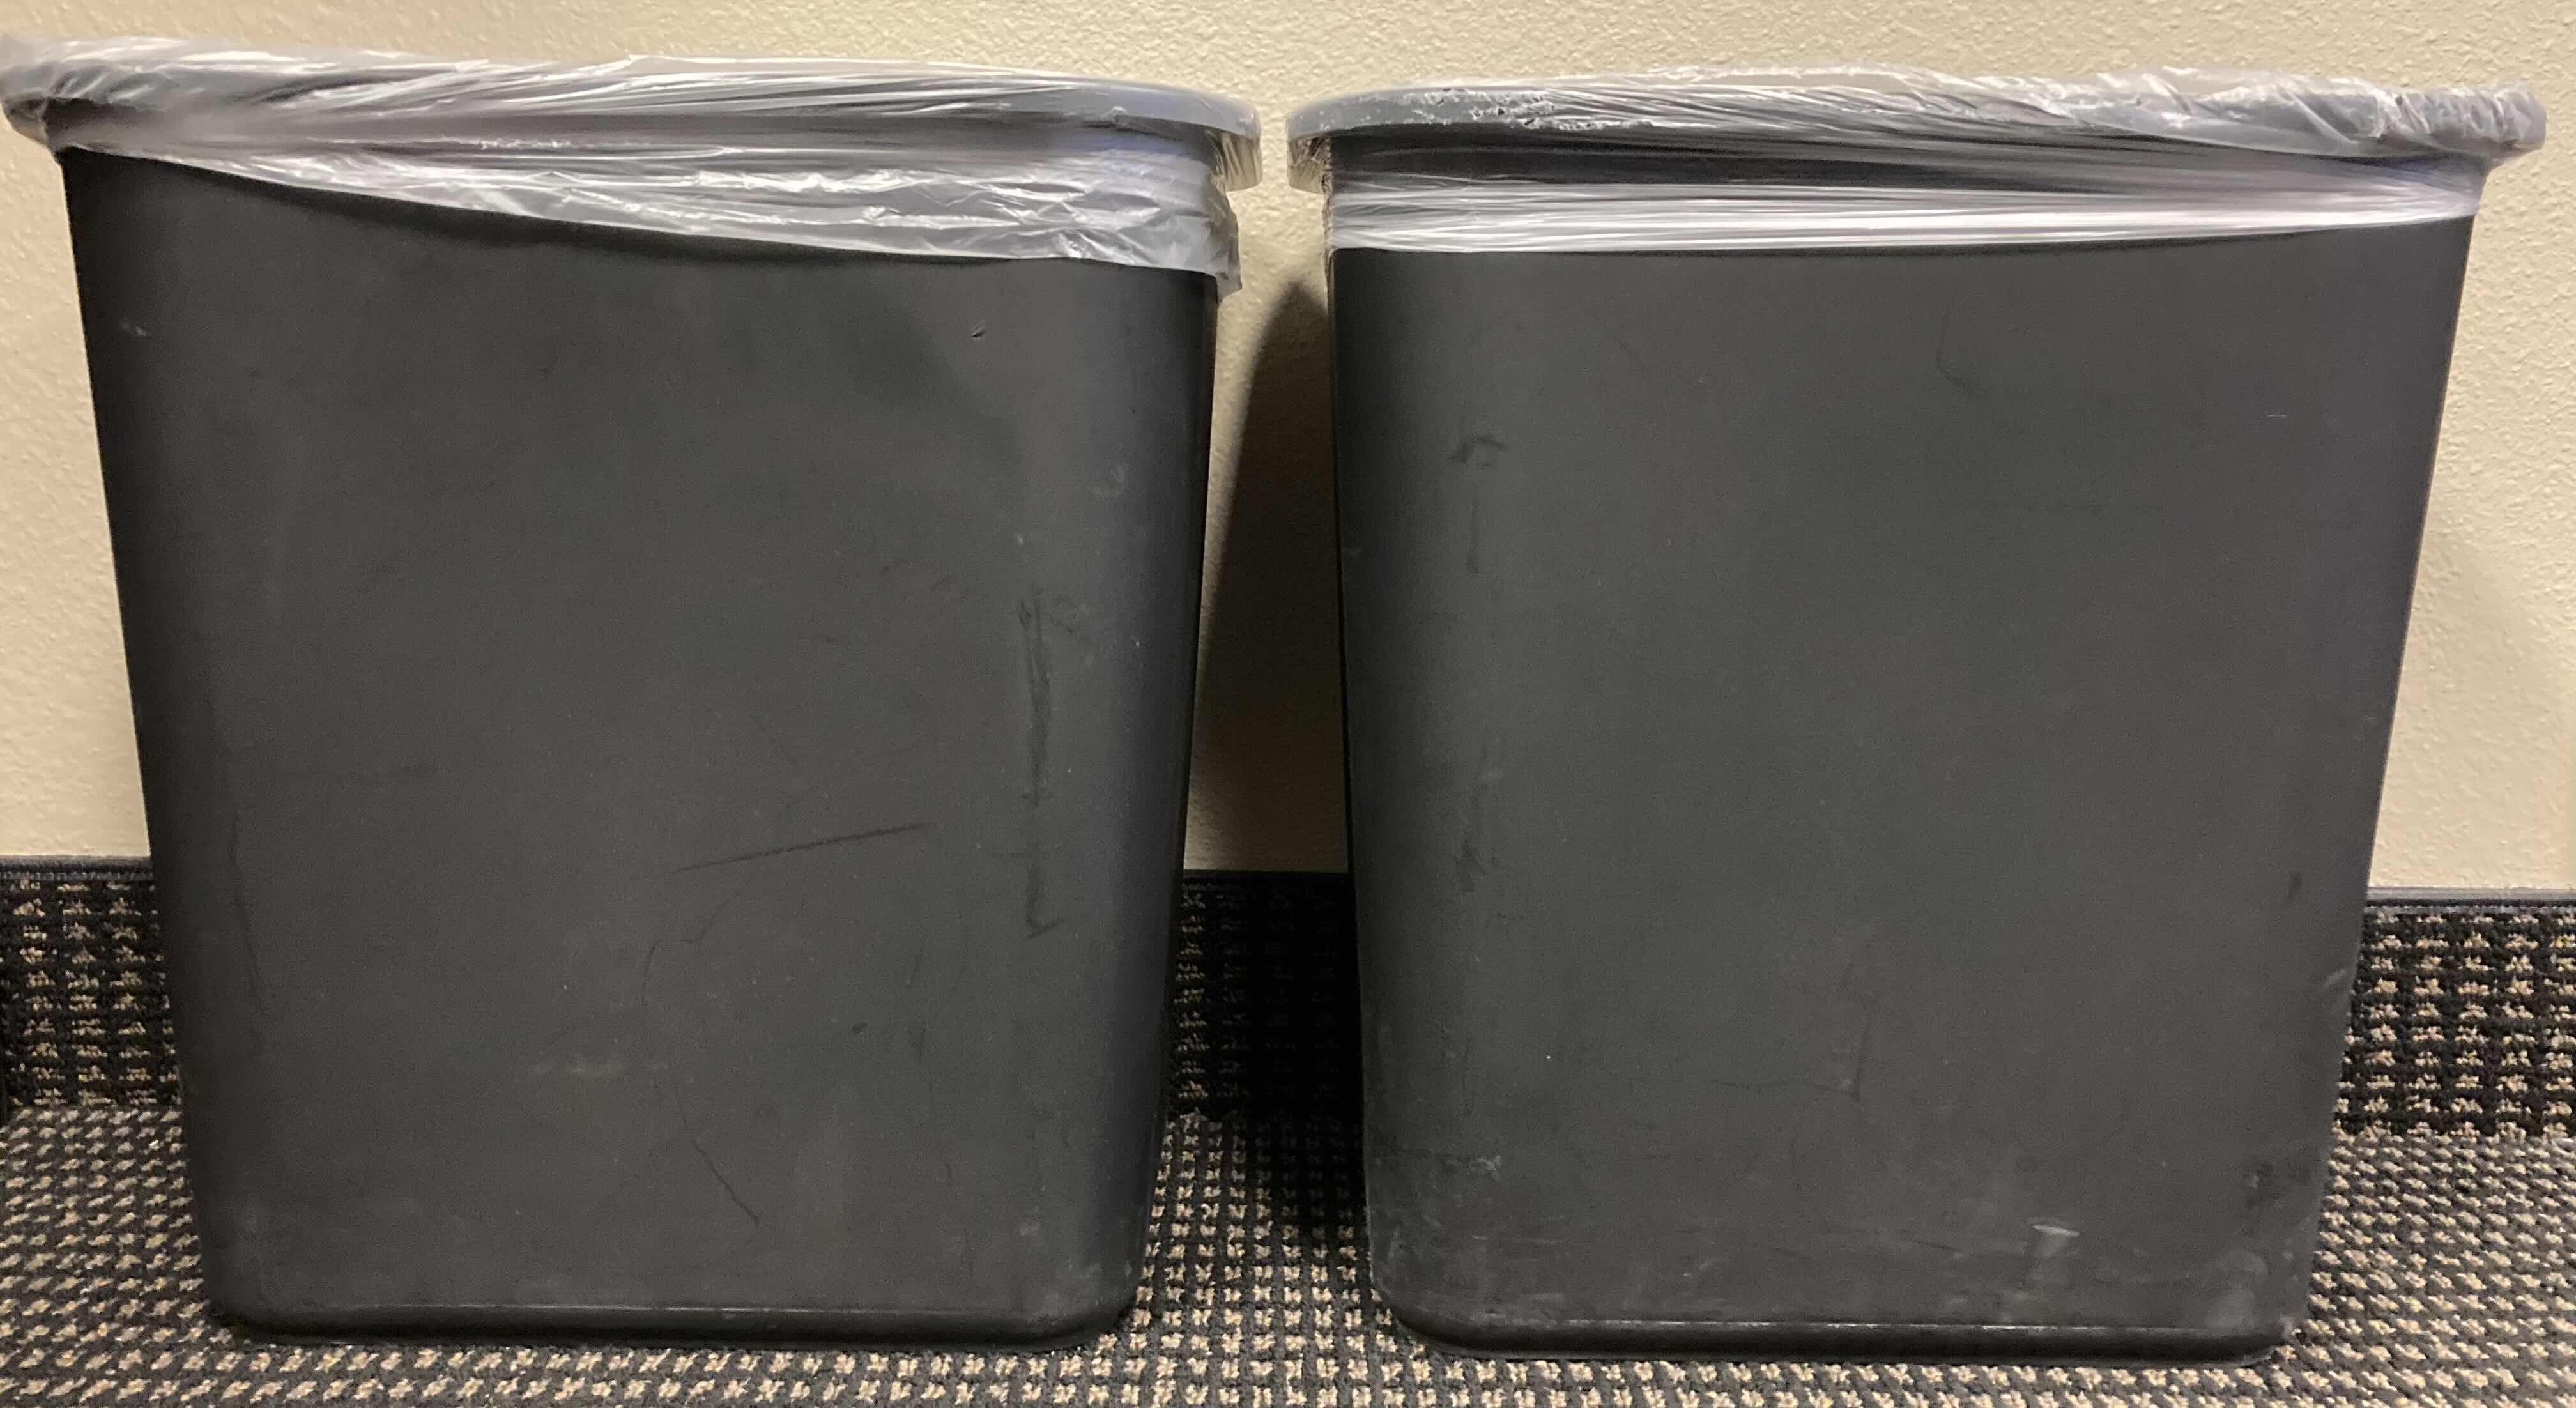 Photo 1 of BRIGHTON PROFESSIONAL BLACK OFFICE TRASH CAN 7GAL SET OF 2 14.5” X 10.5” H15”